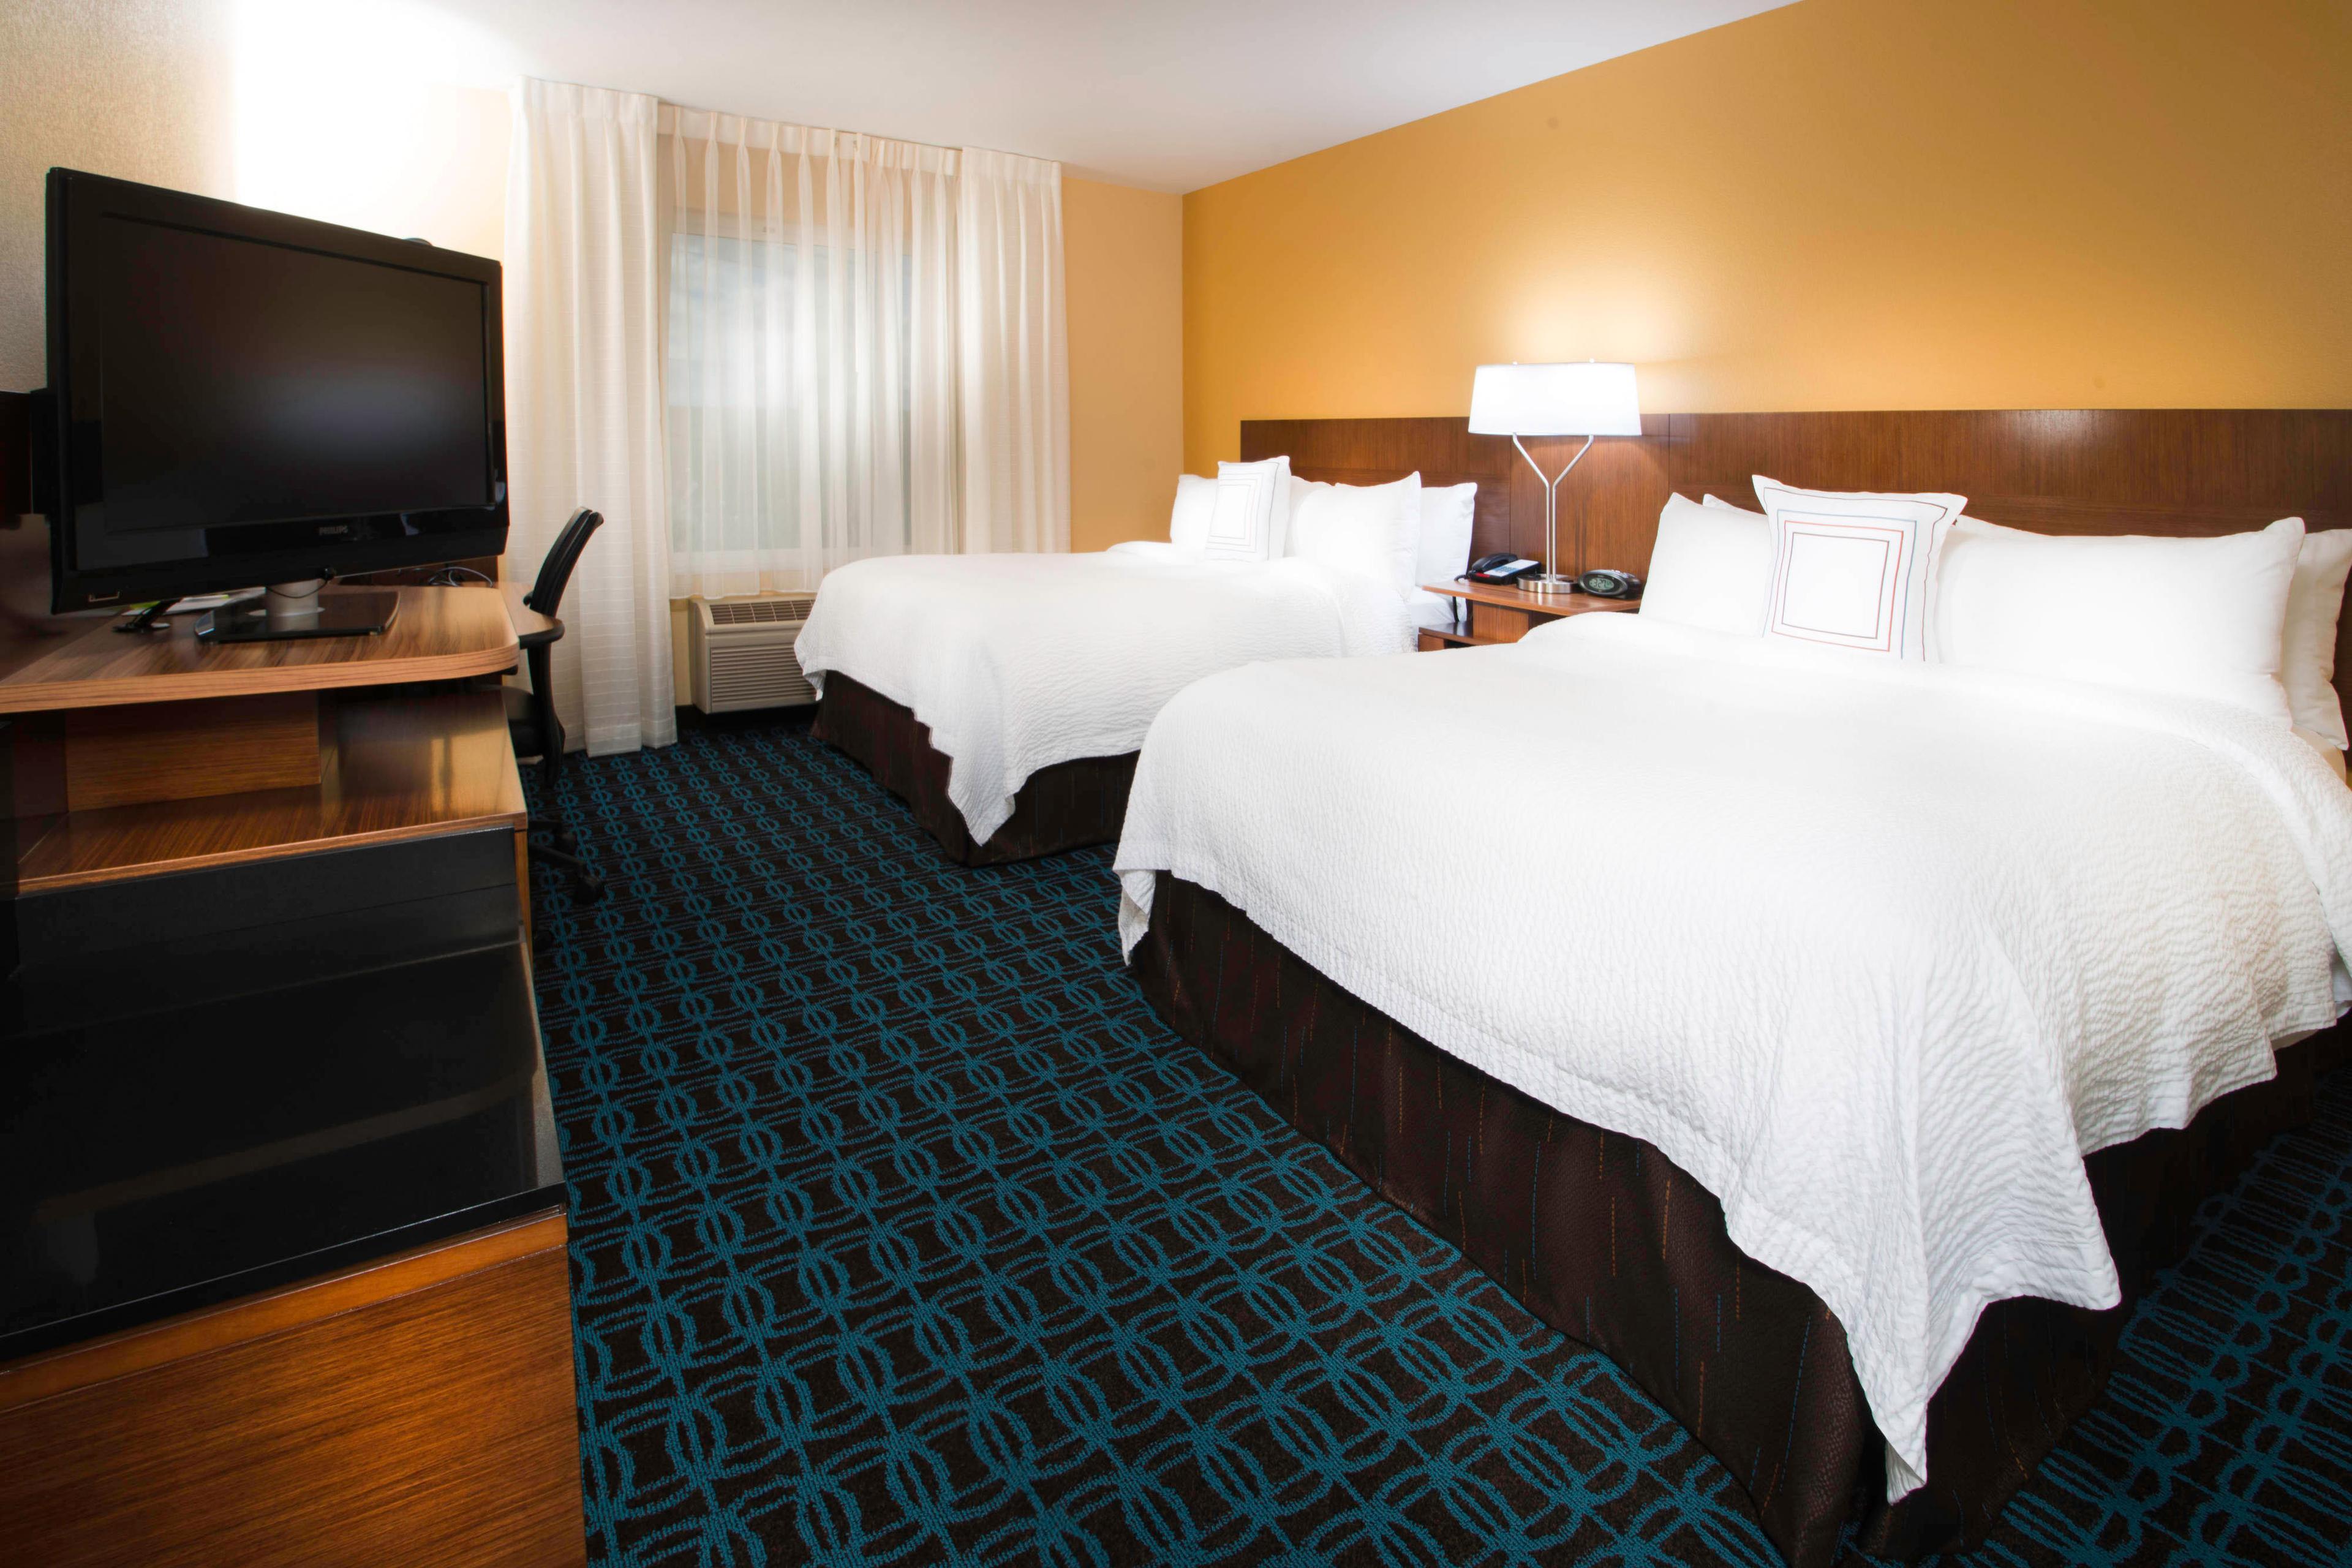 Our guest rooms featuring two queen-size beds with fresh linens, have a work desk, 42-inch television, refrigerator and microwave.